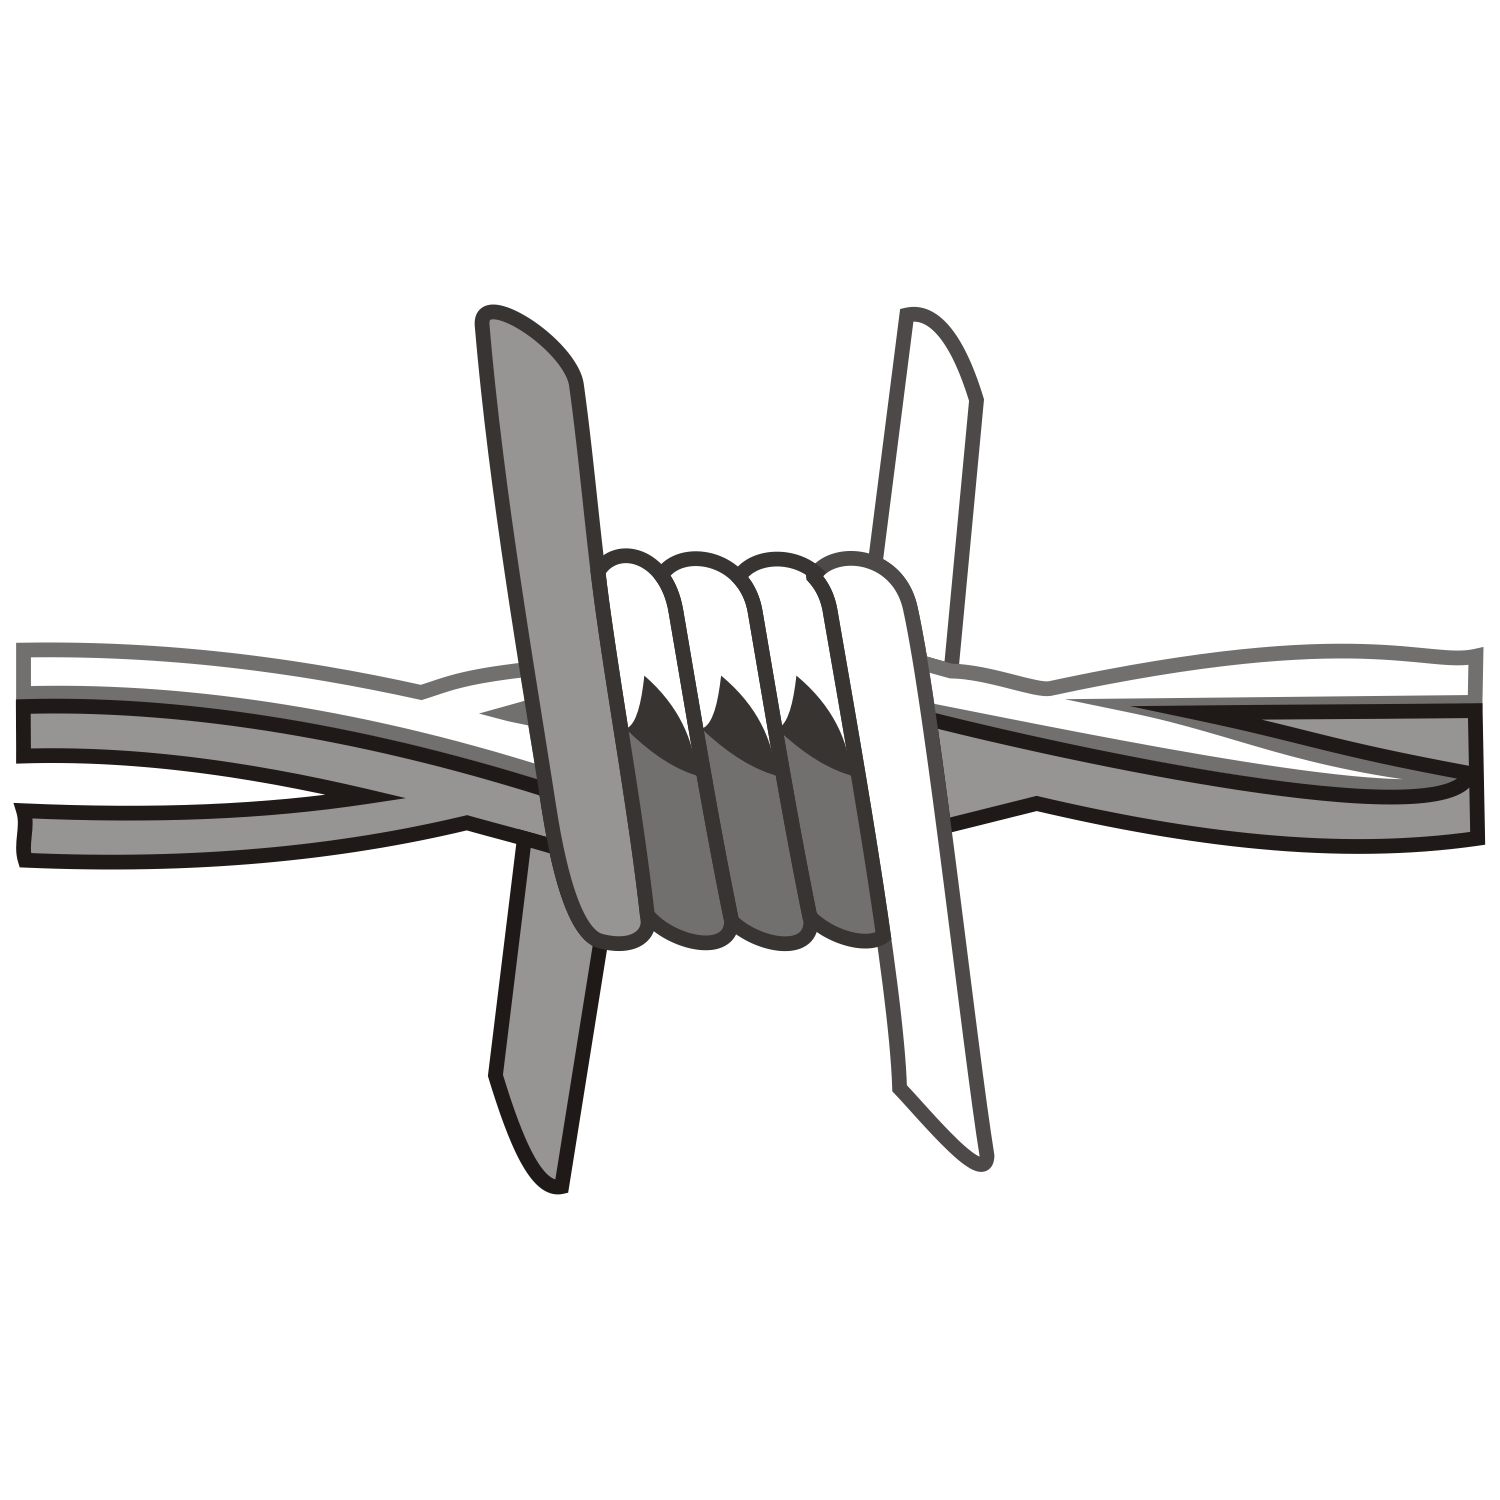 10 Barb Wire Free Cliparts That You Can Download To You Computer And